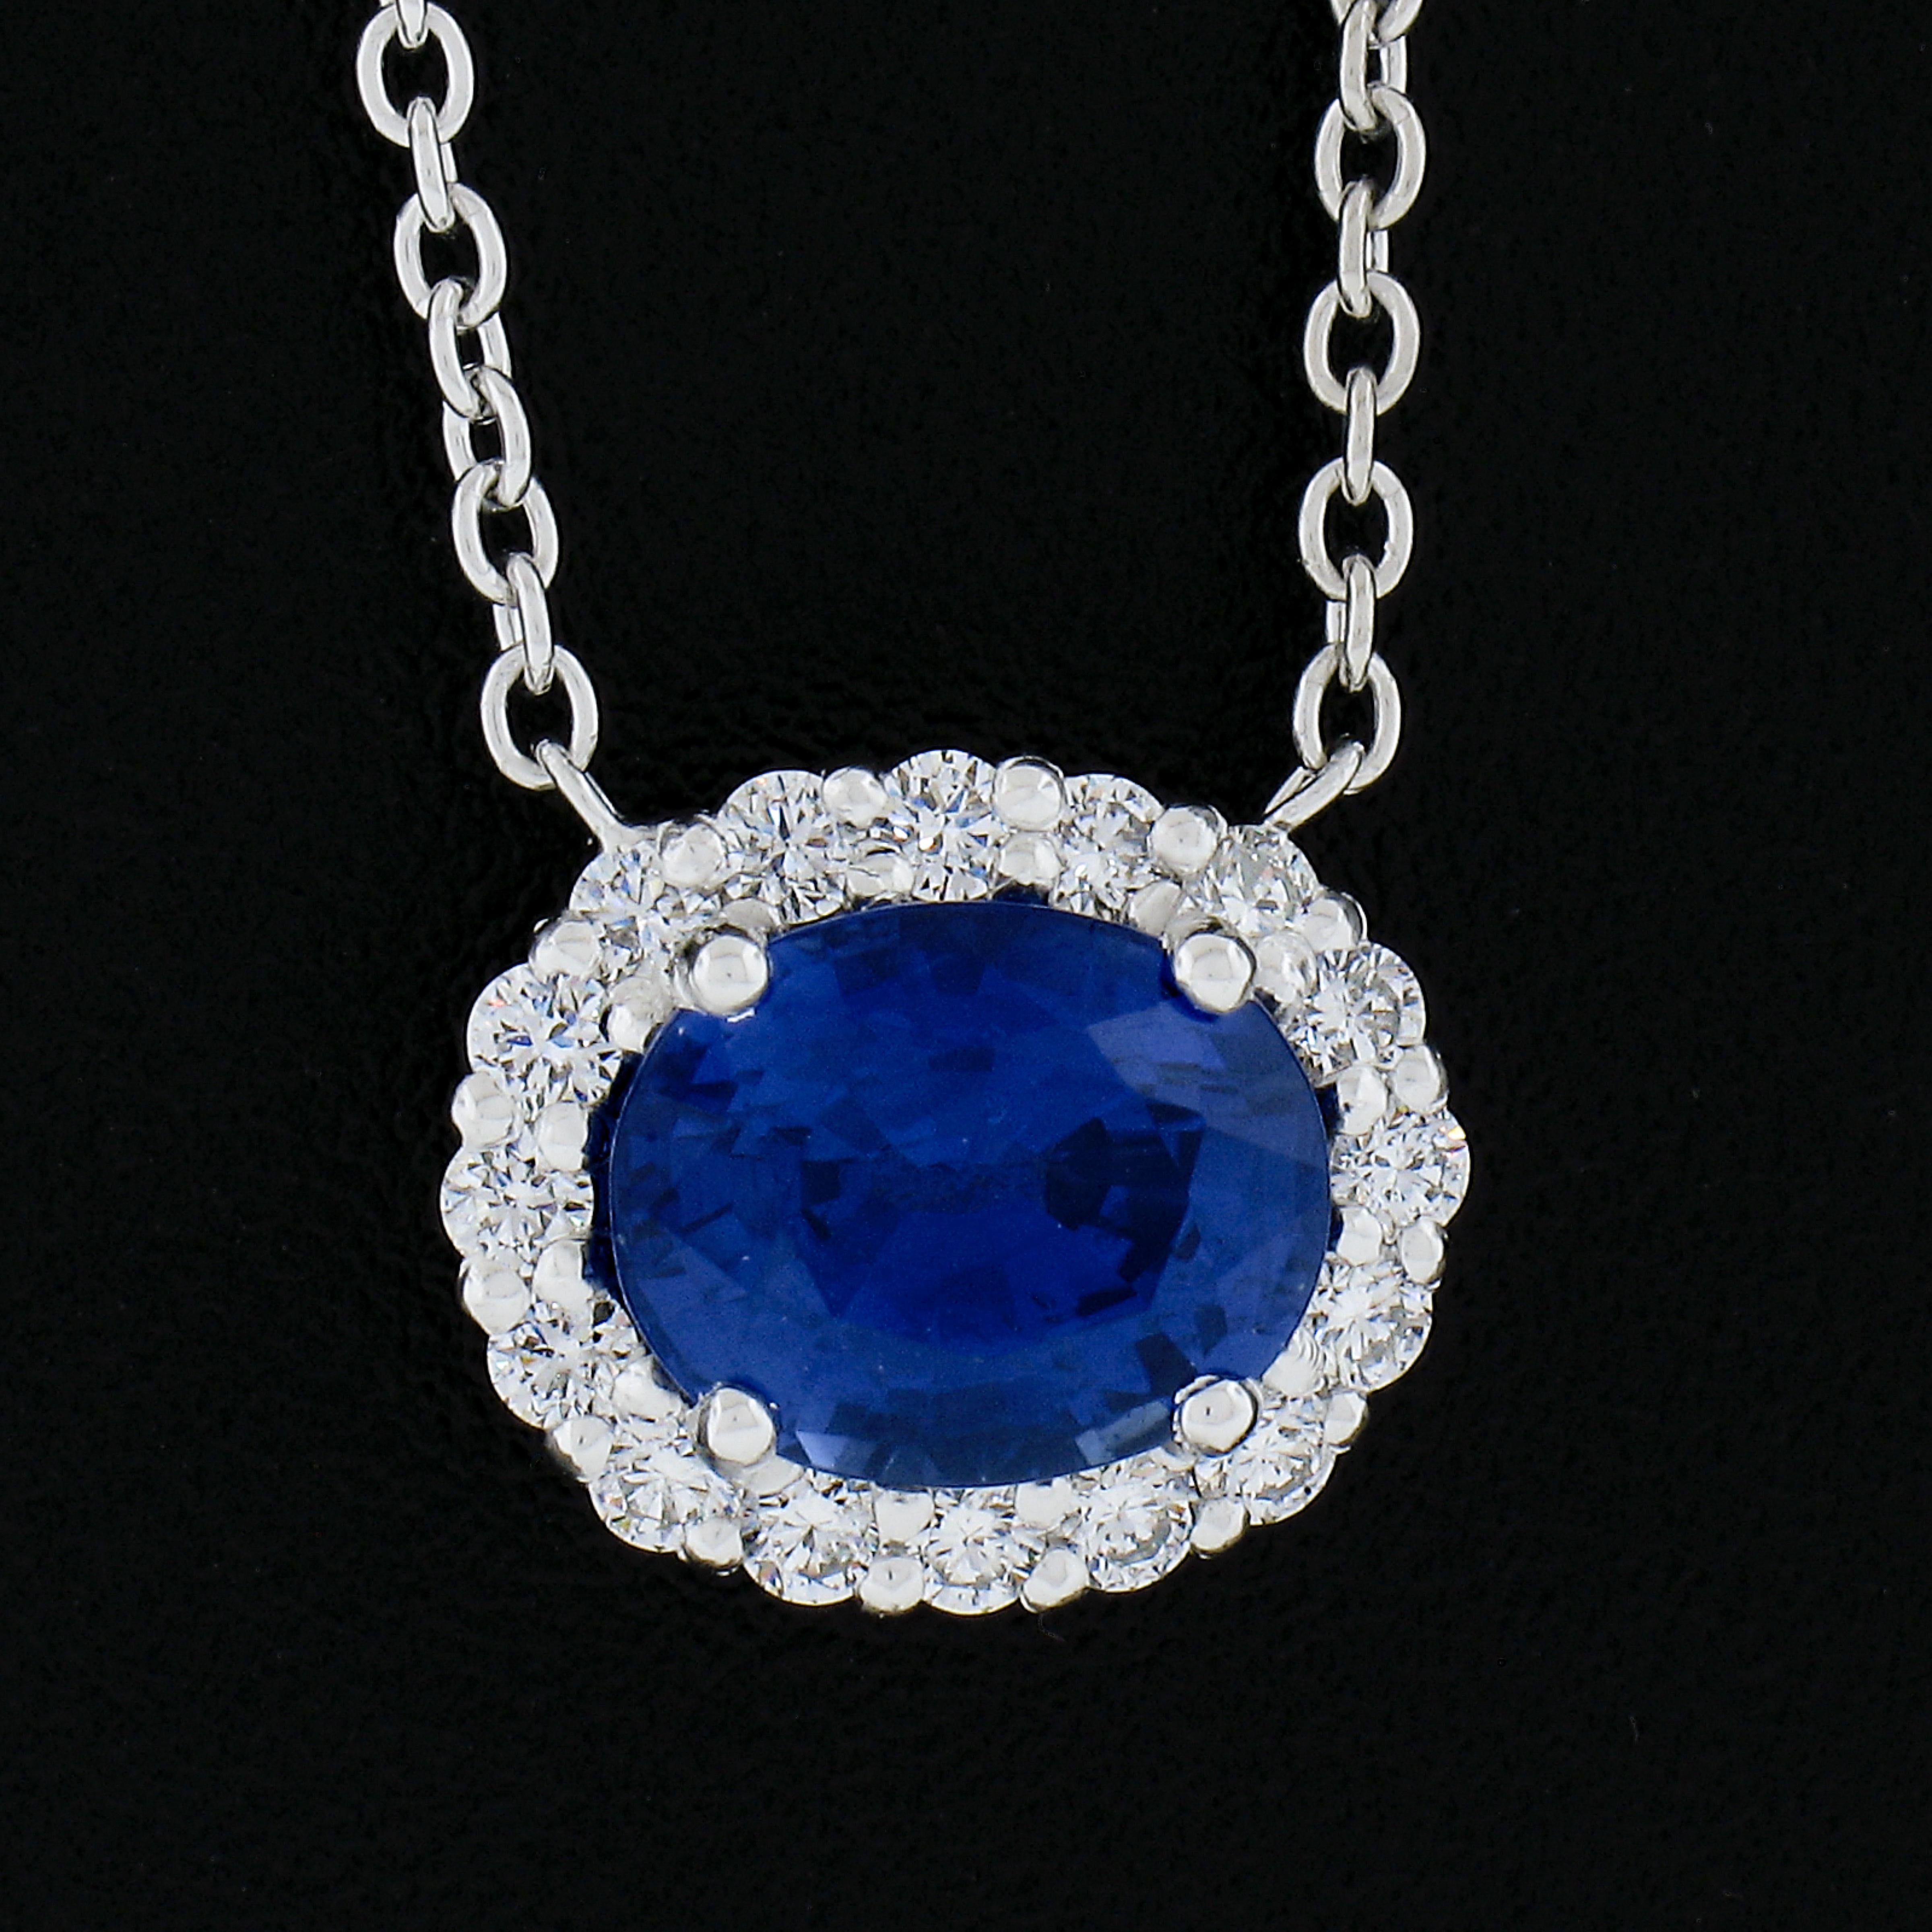 Oval Cut NEW Platinum 2.42ct GIA Oval AMAZING BLUE Sapphire Diamond Halo Pendant Necklace For Sale